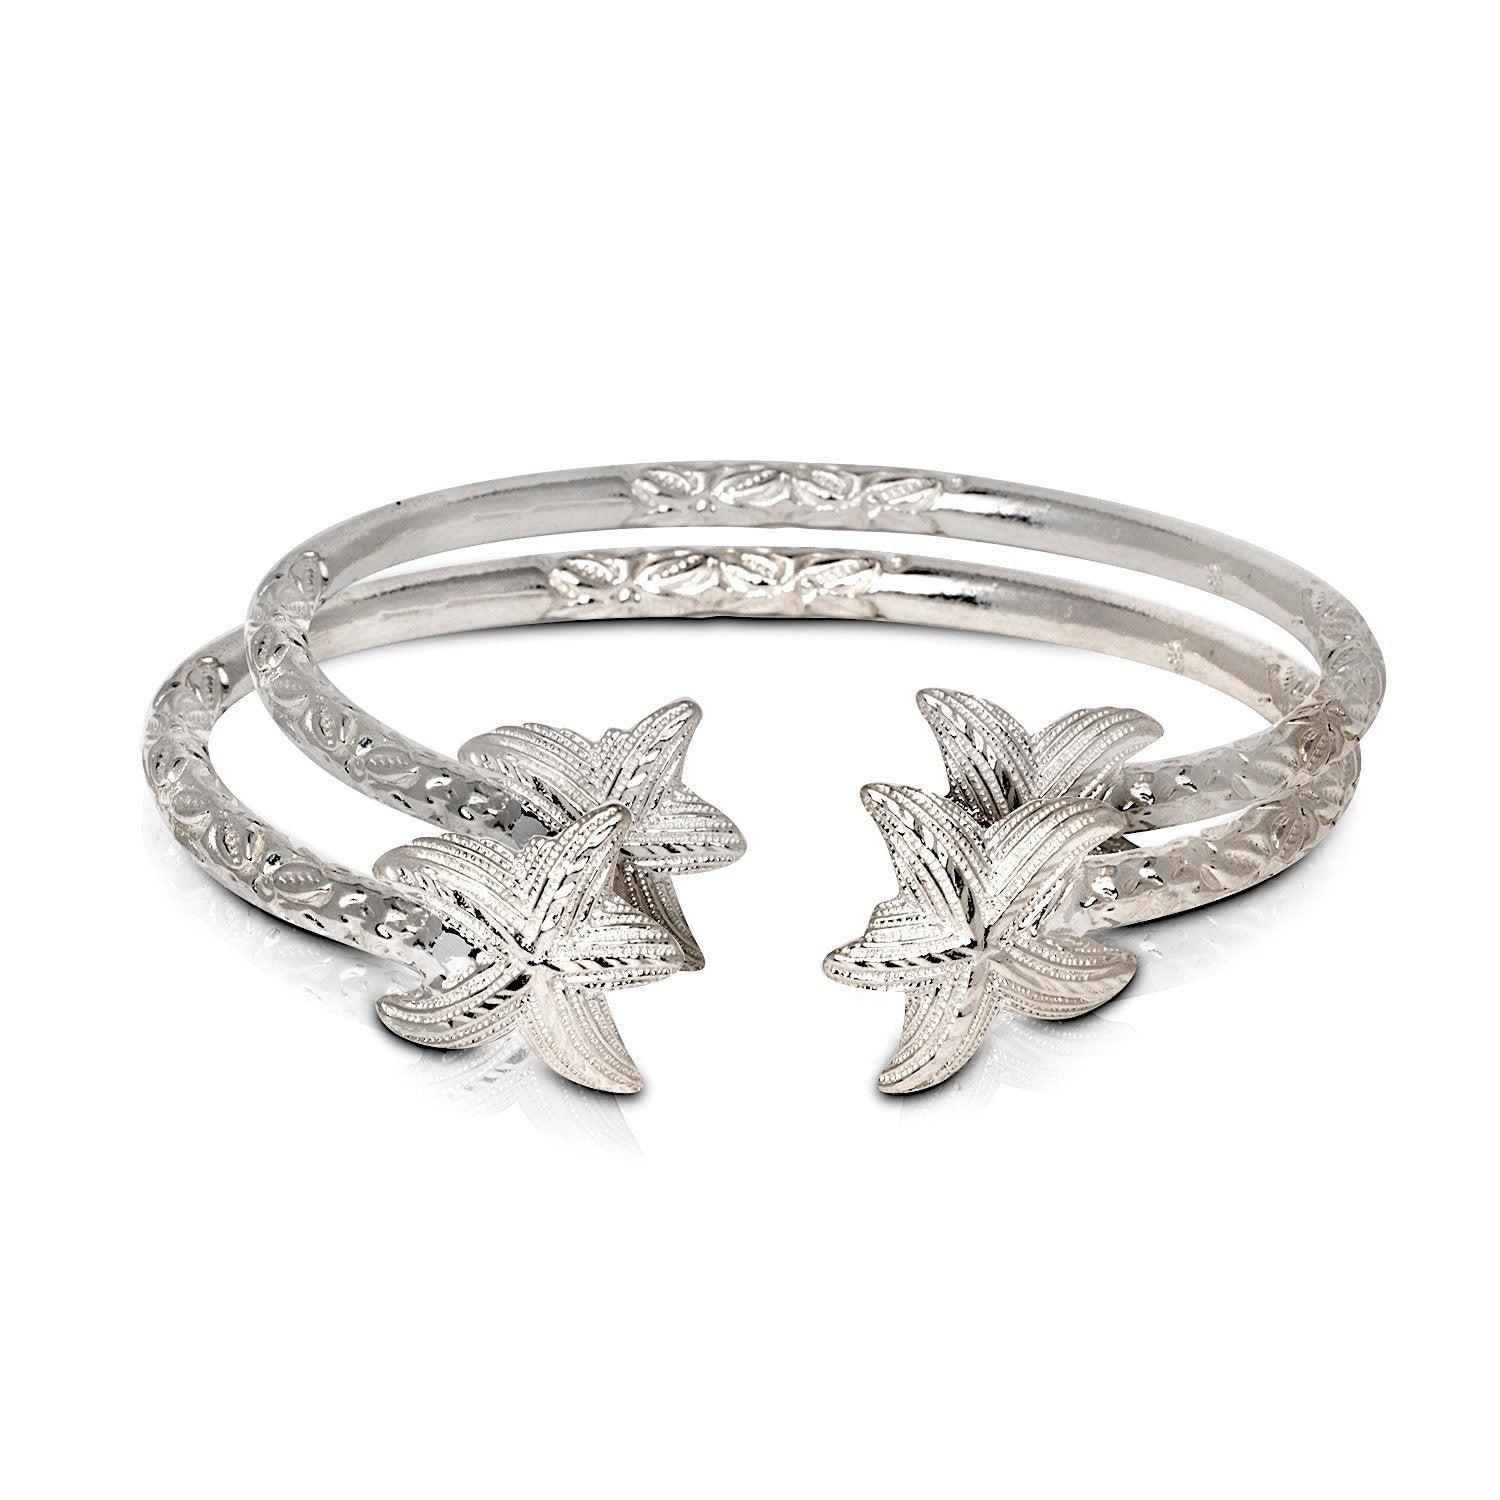 Solid .925 Sterling Silver Starfish Bangles (Pair) (Made in USA) - Betterjewelry